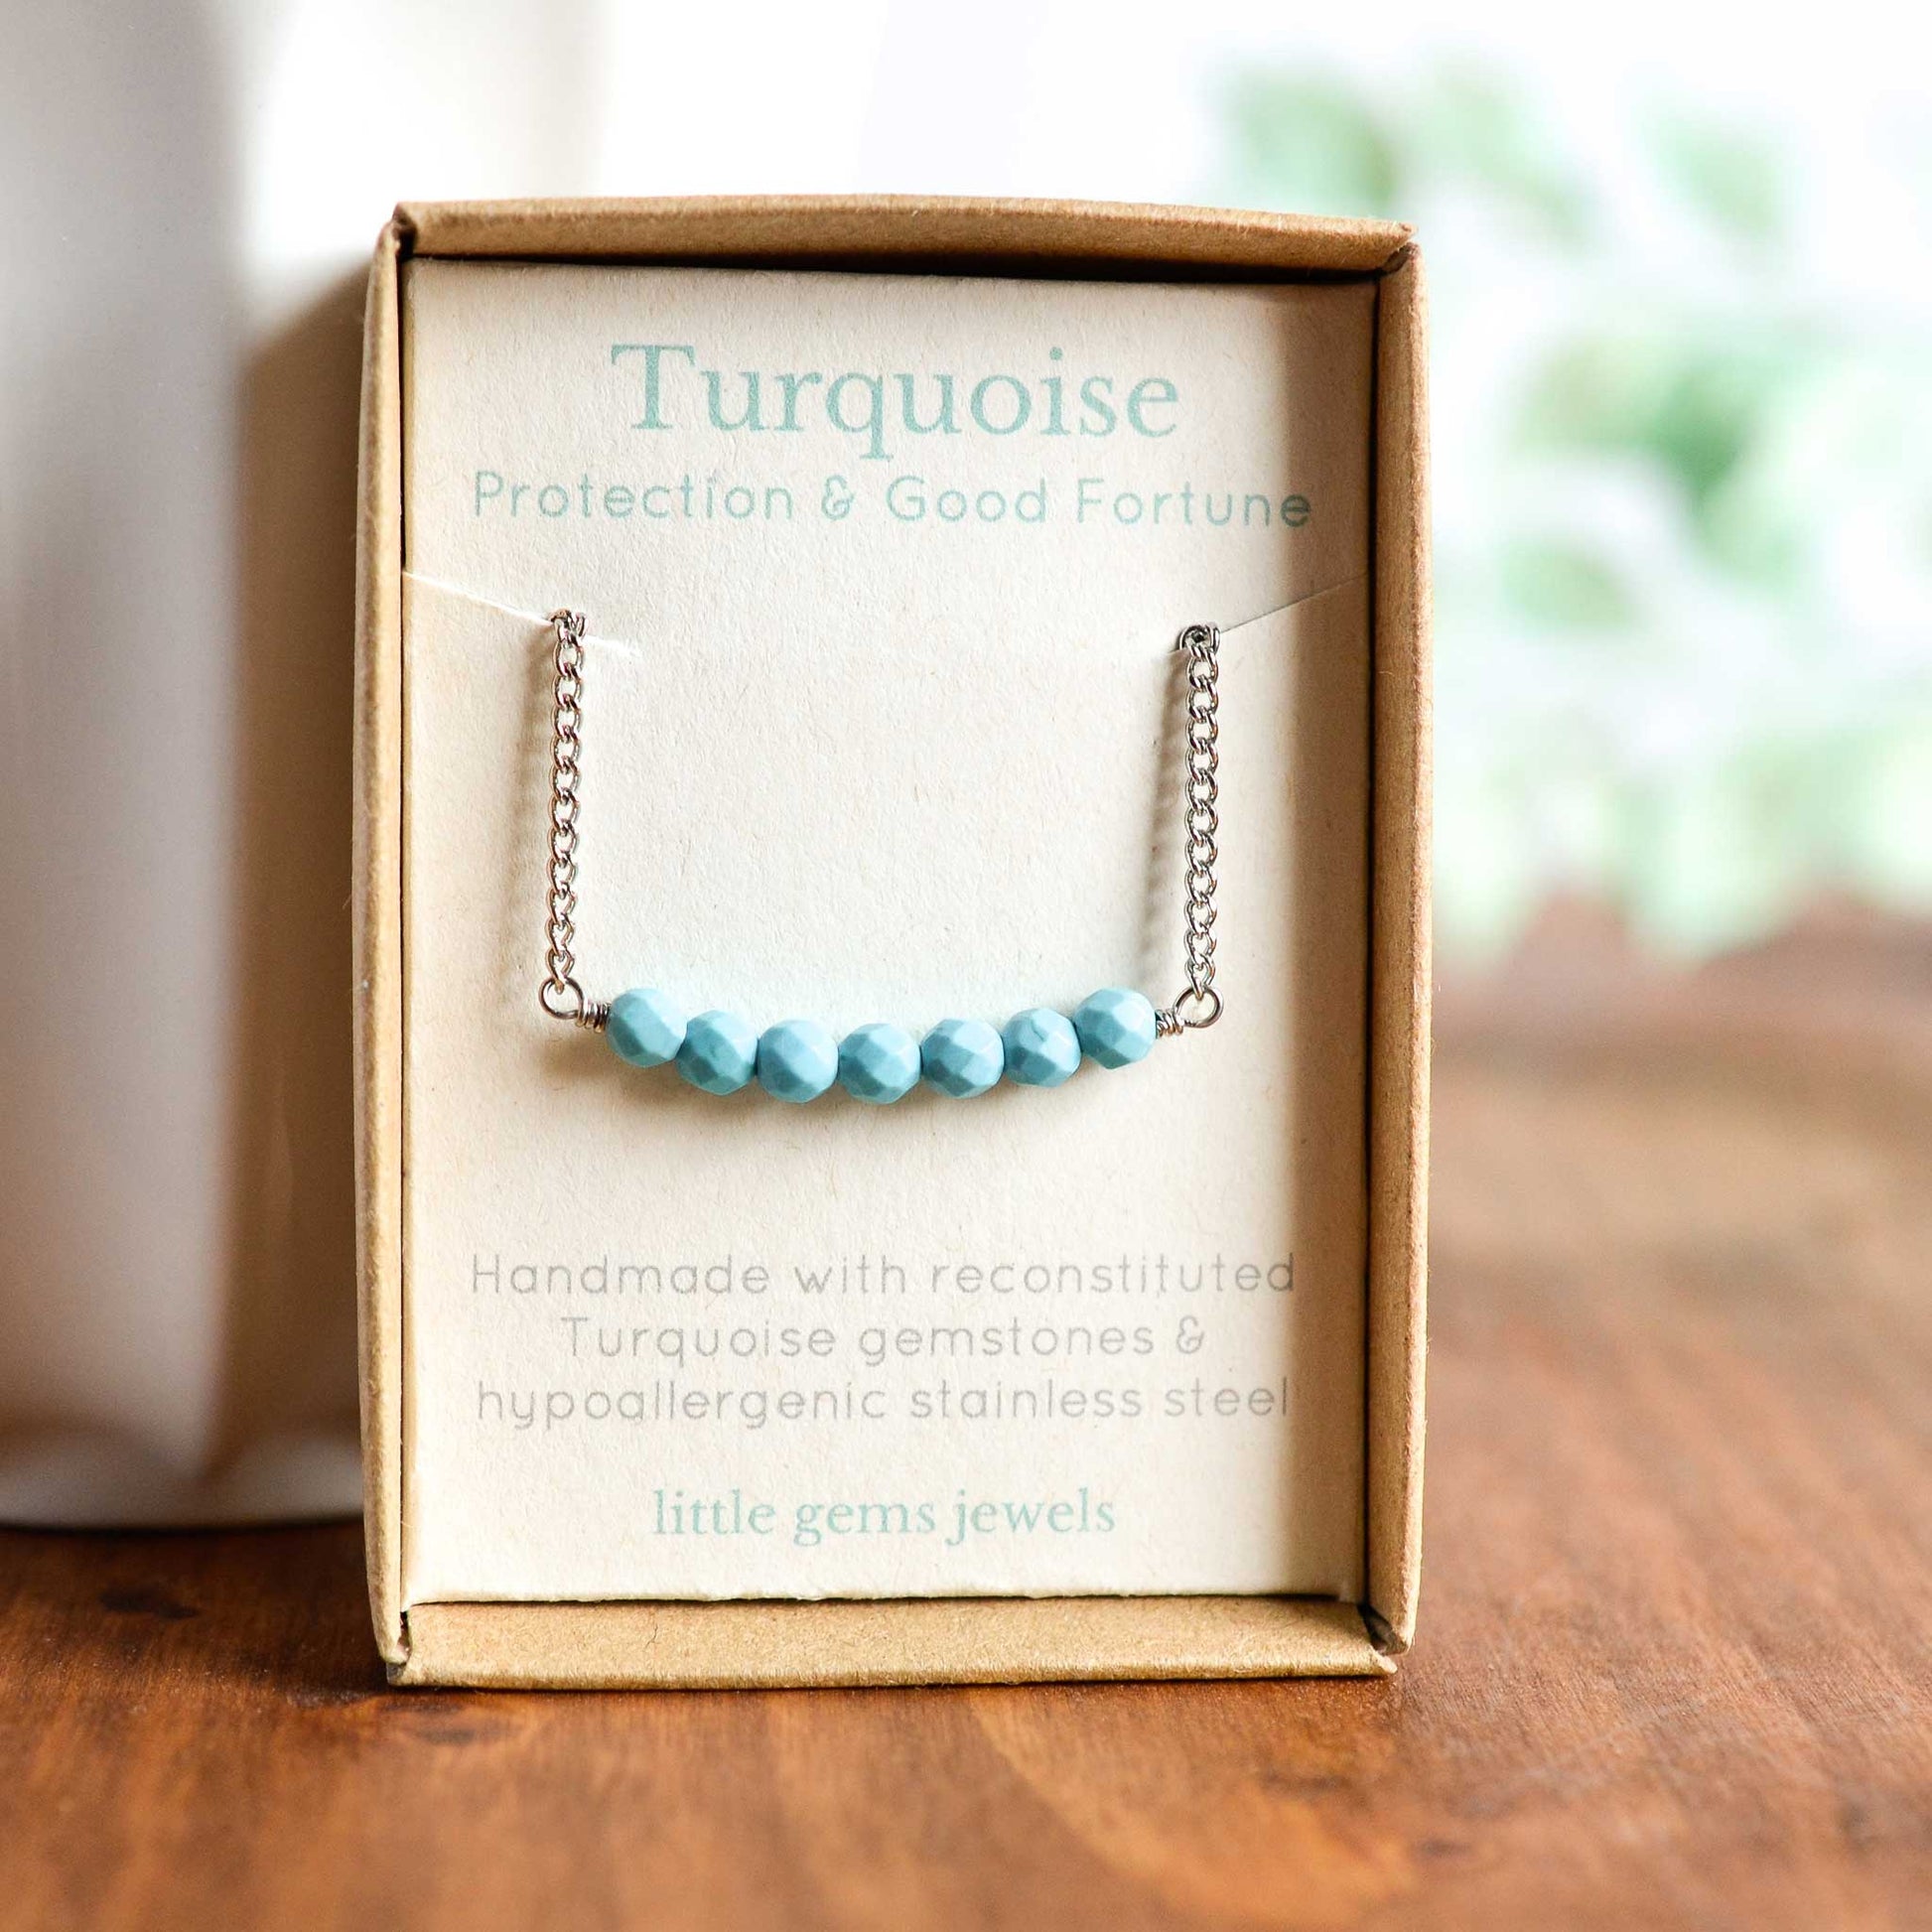 Dainty Turquoise gemstone necklace in eco friendly gift box